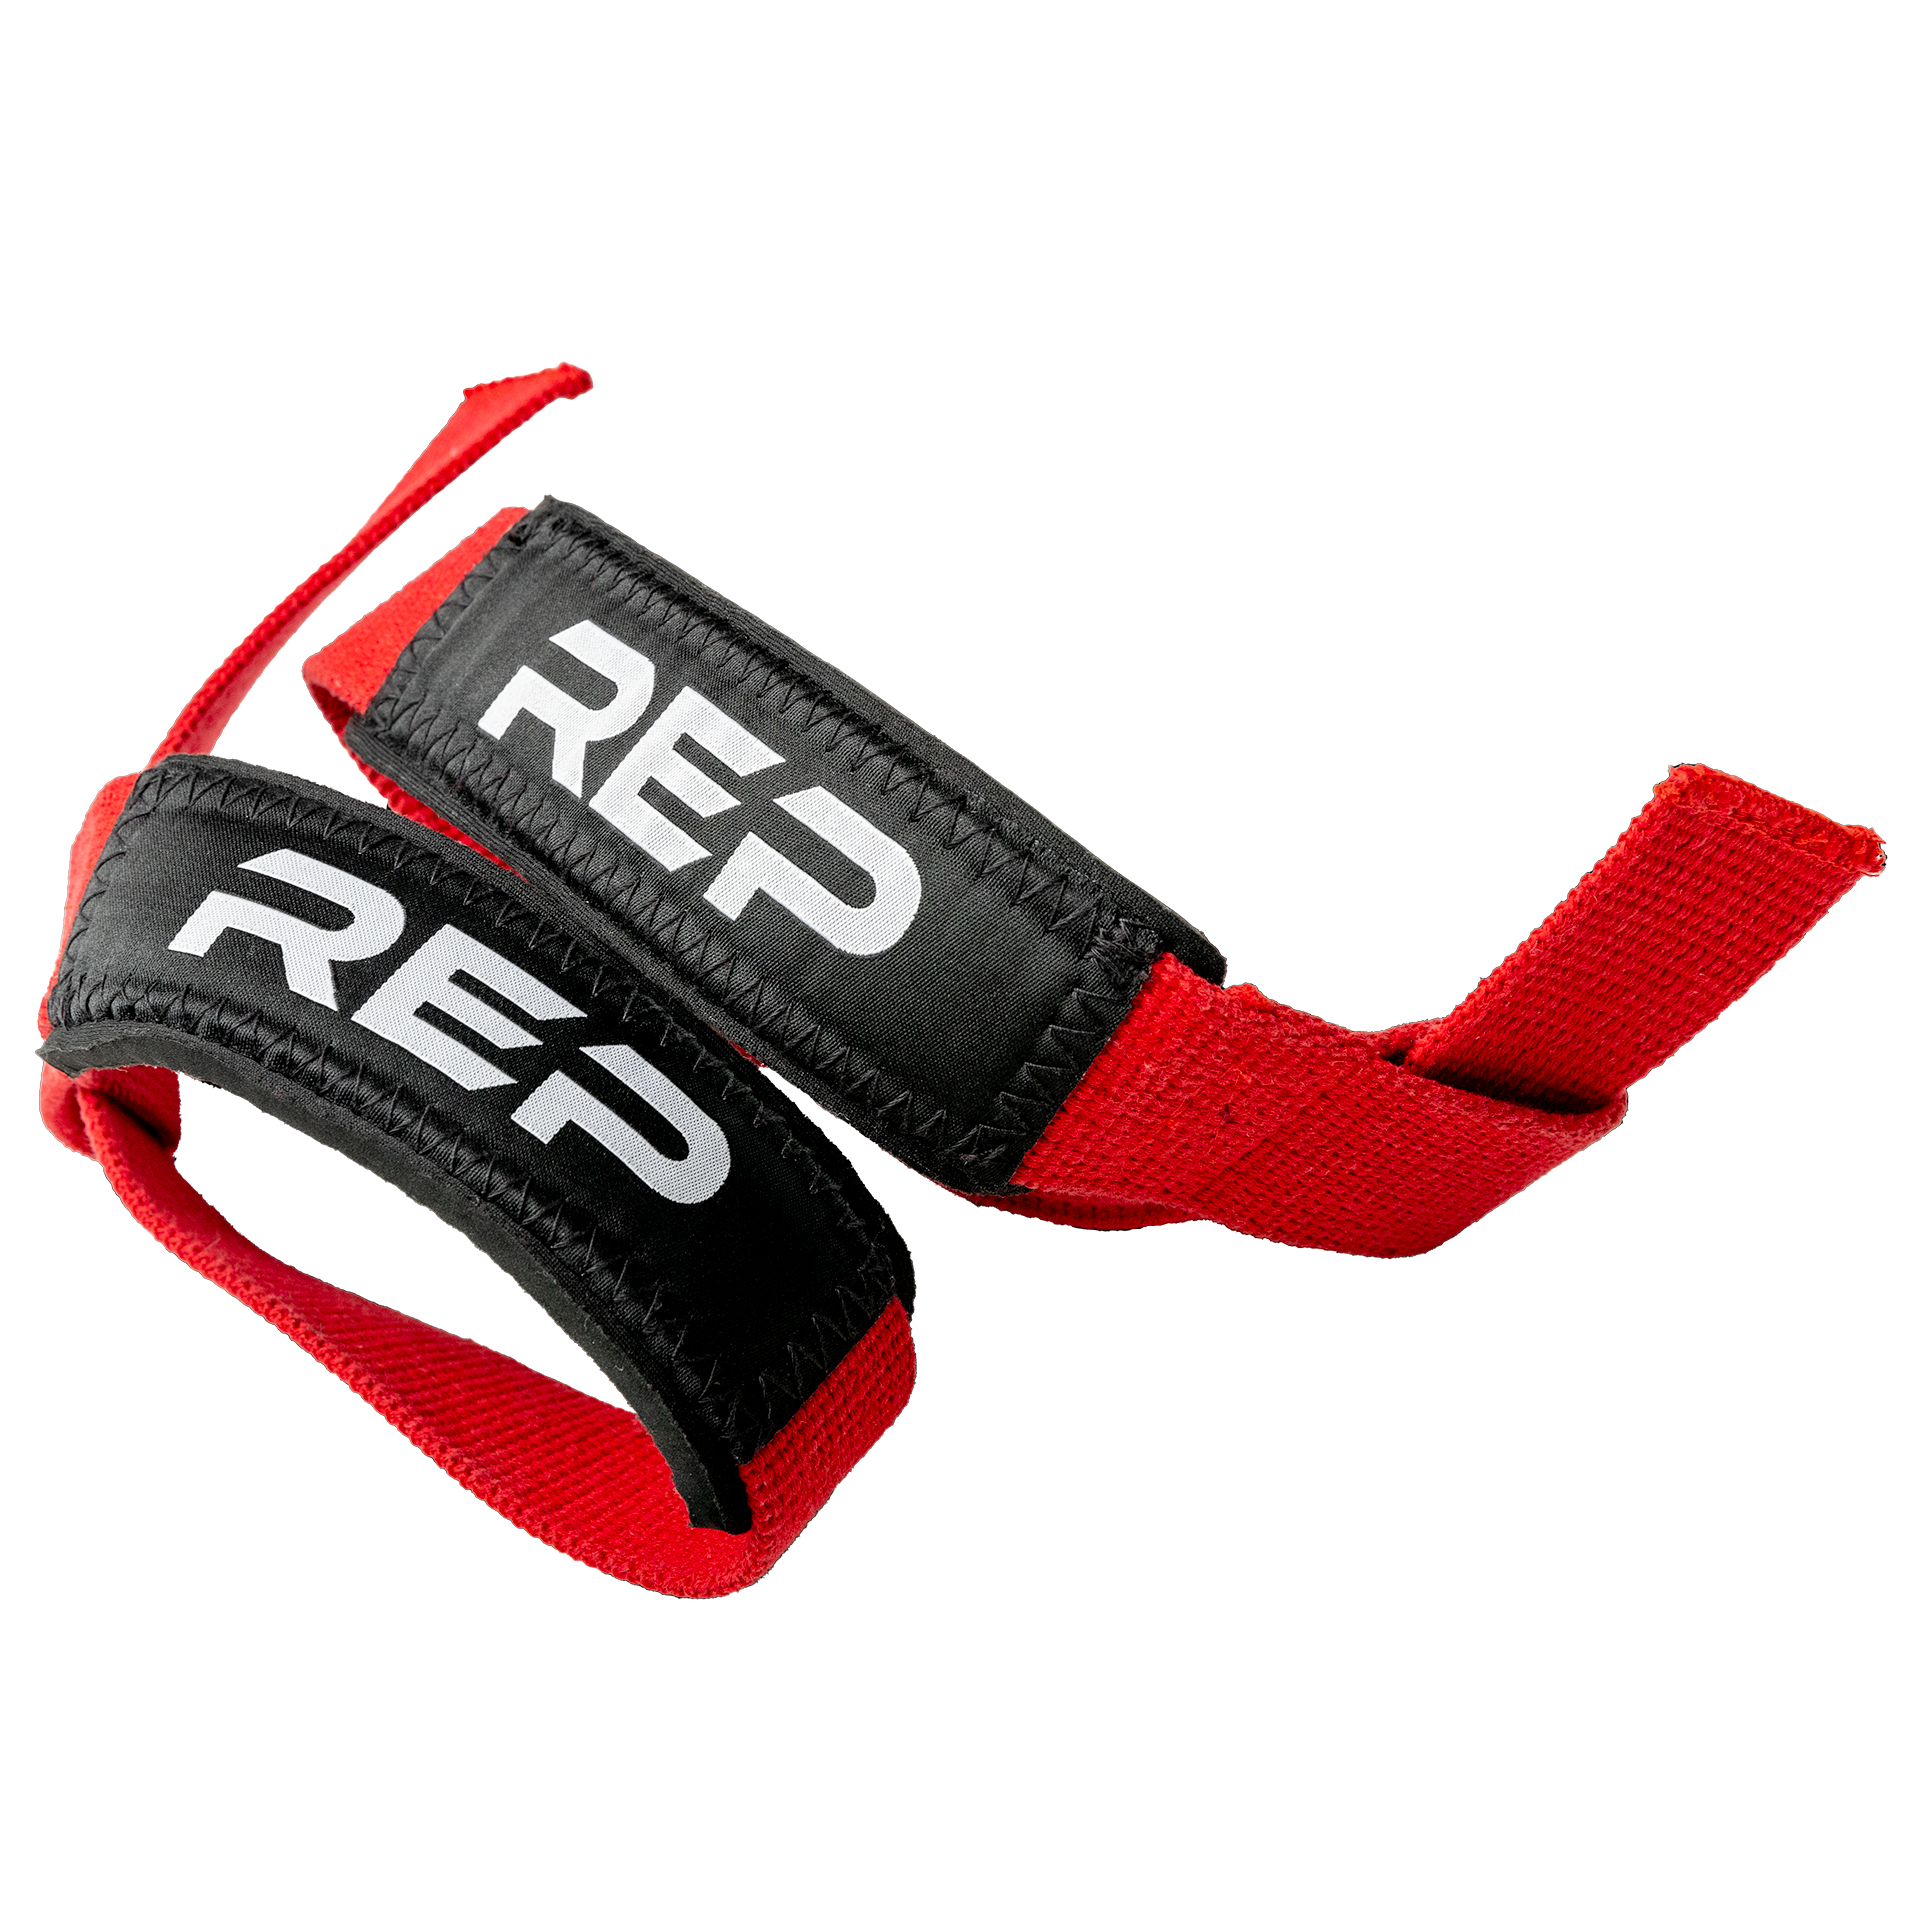 Lifting Straps - Red